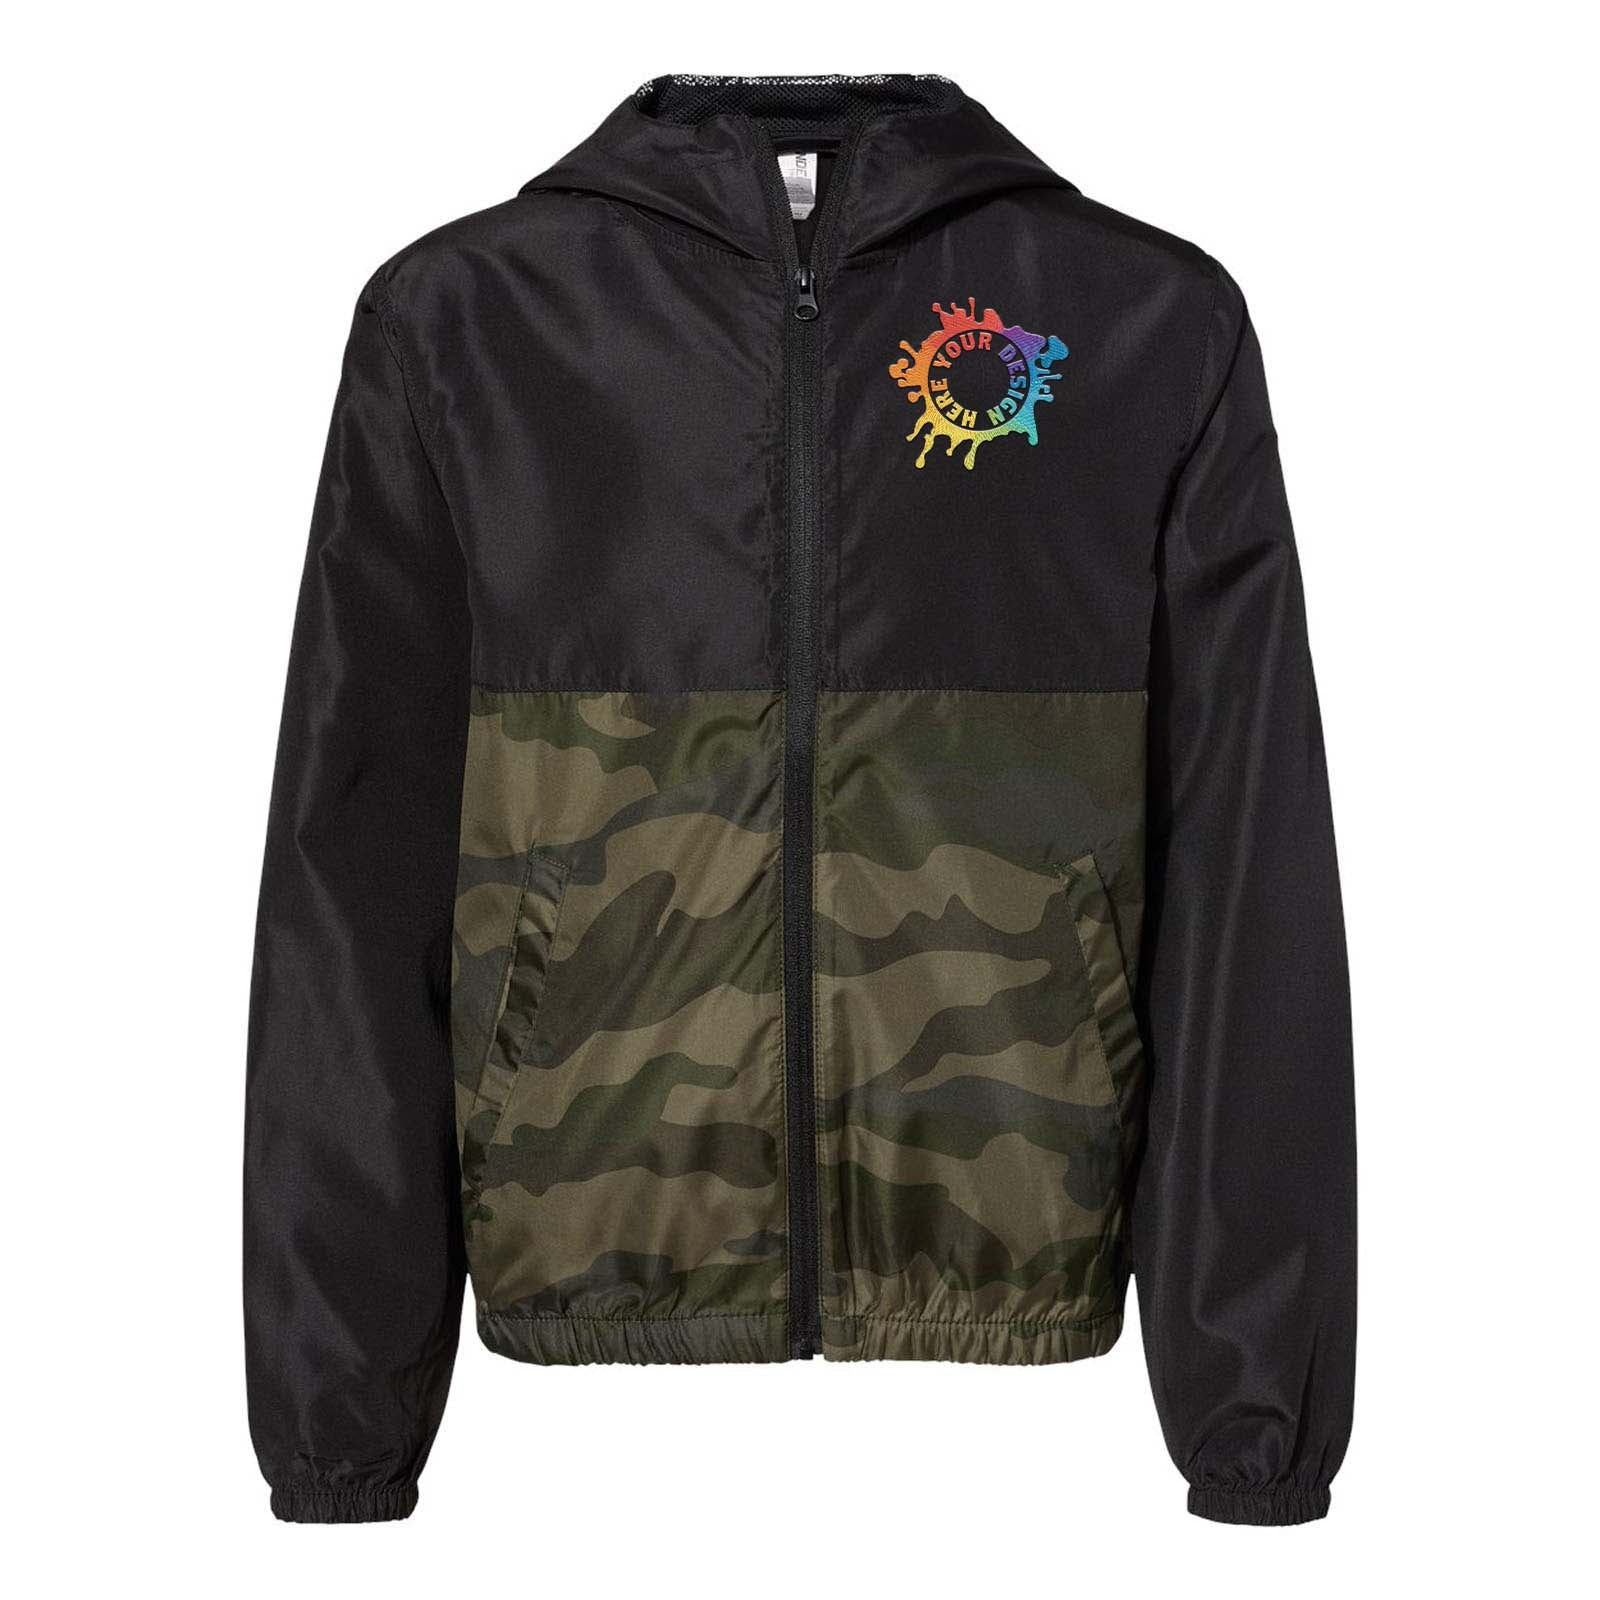 Independent Trading Co. - Youth Lightweight Windbreaker Full-Zip Jacket Embroidery - Mato & Hash